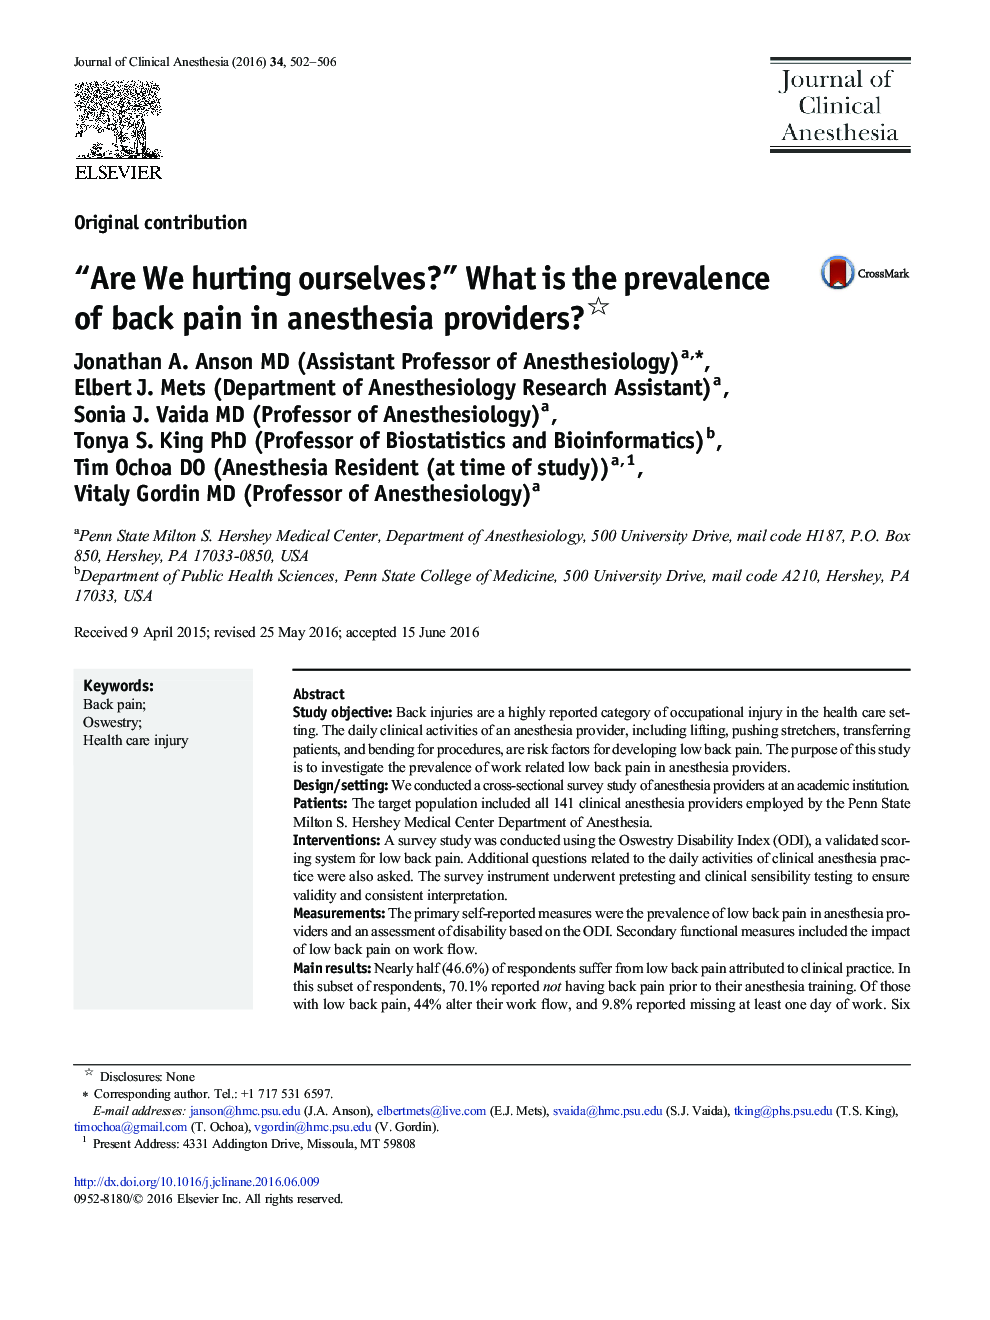 “Are We hurting ourselves?” What is the prevalence of back pain in anesthesia providers?